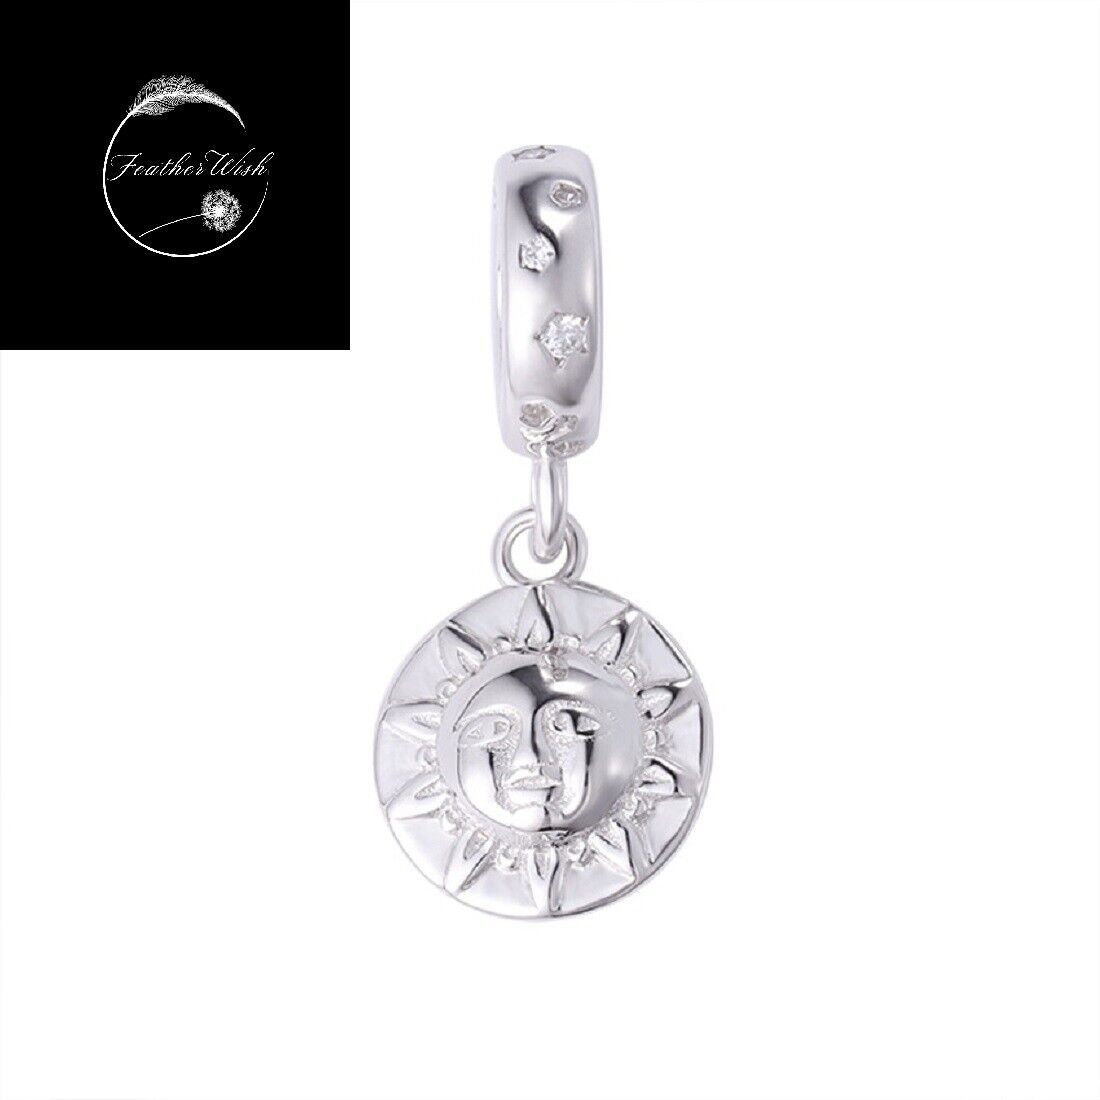 Primary image for Genuine Sterling Silver 925 Solid Sun Charm With Rose Gold Or Silver With CZ